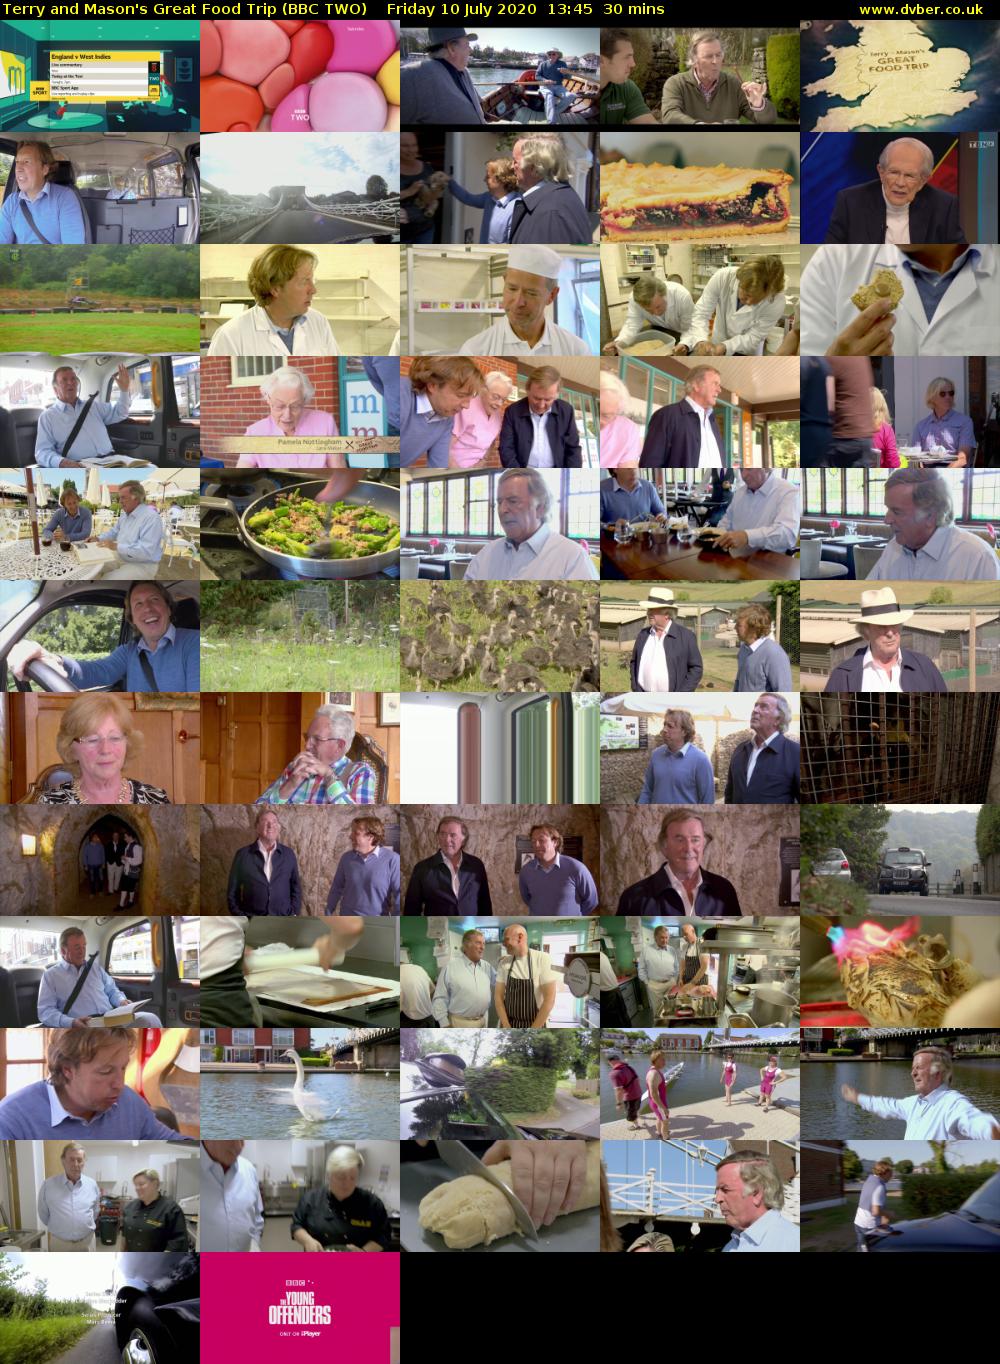 Terry and Mason's Great Food Trip (BBC TWO) Friday 10 July 2020 13:45 - 14:15